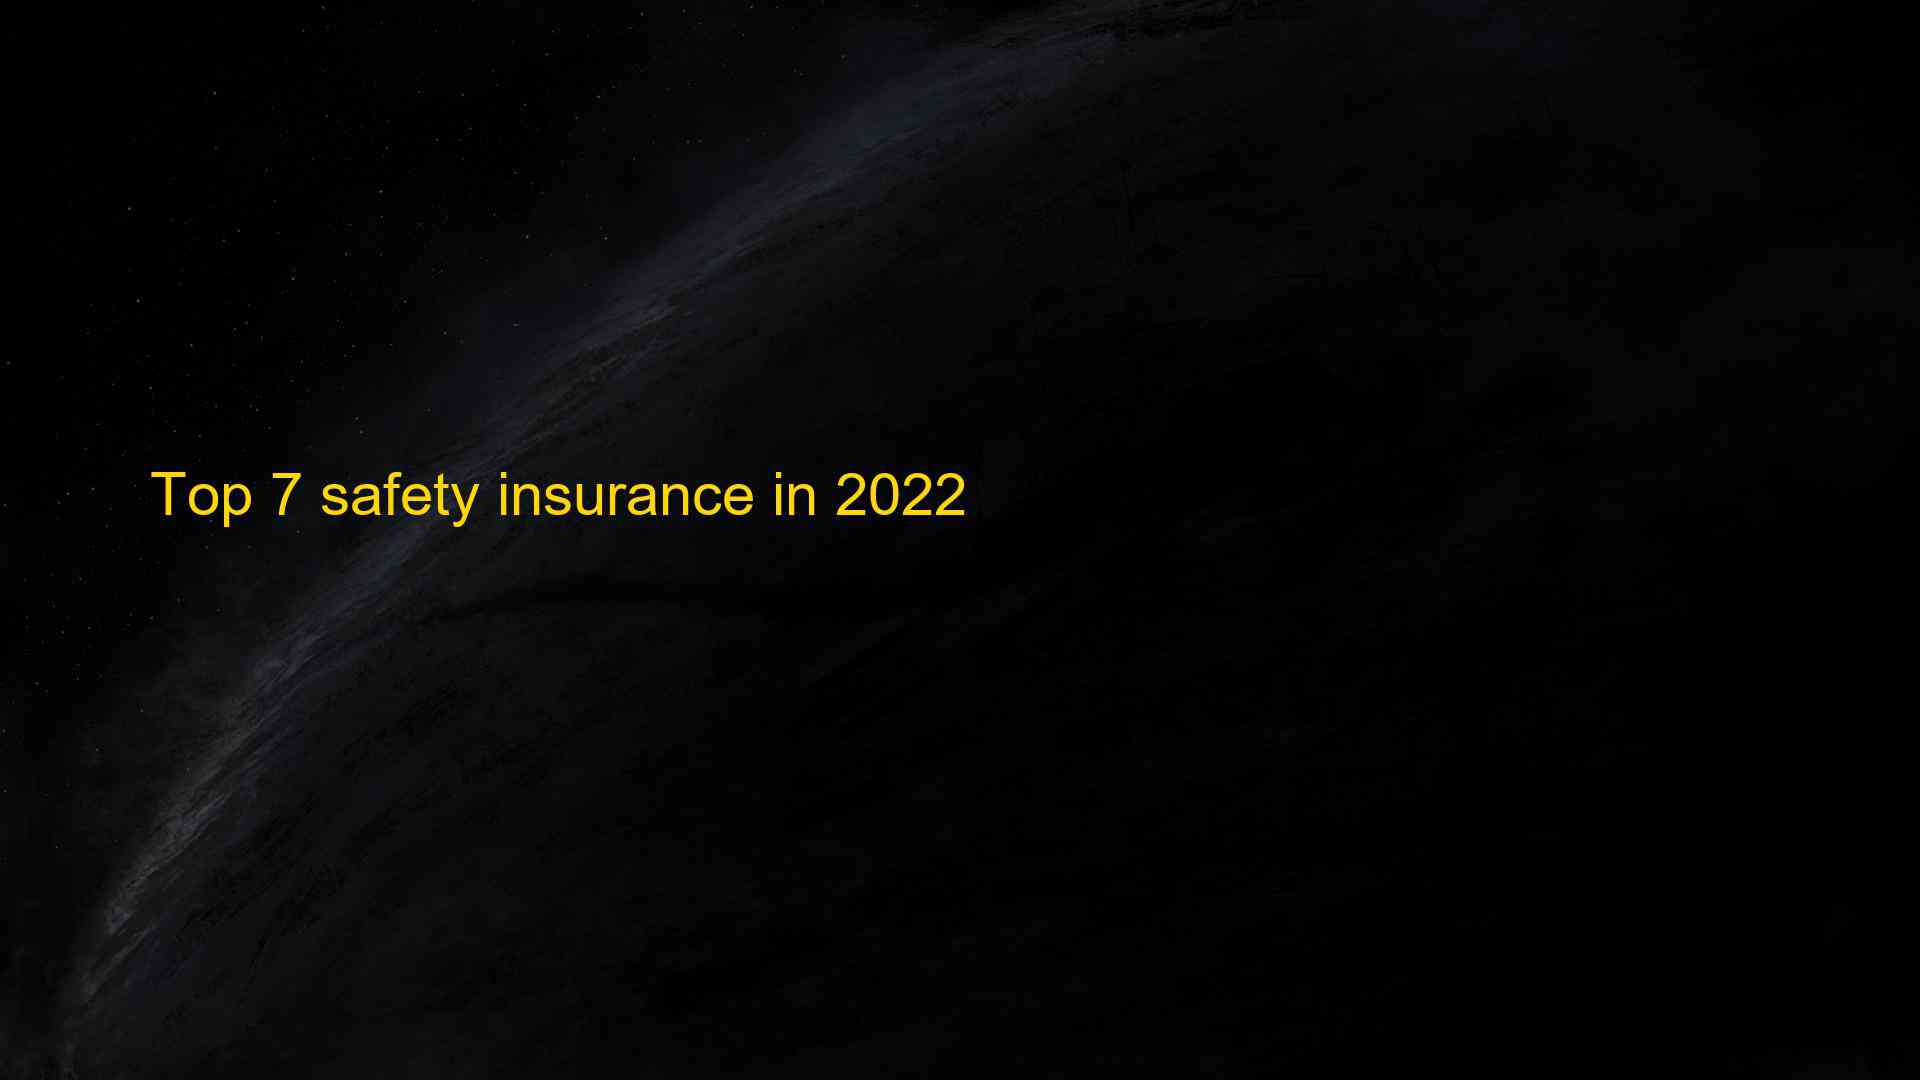 Top 7 safety insurance in 2022 1660480058